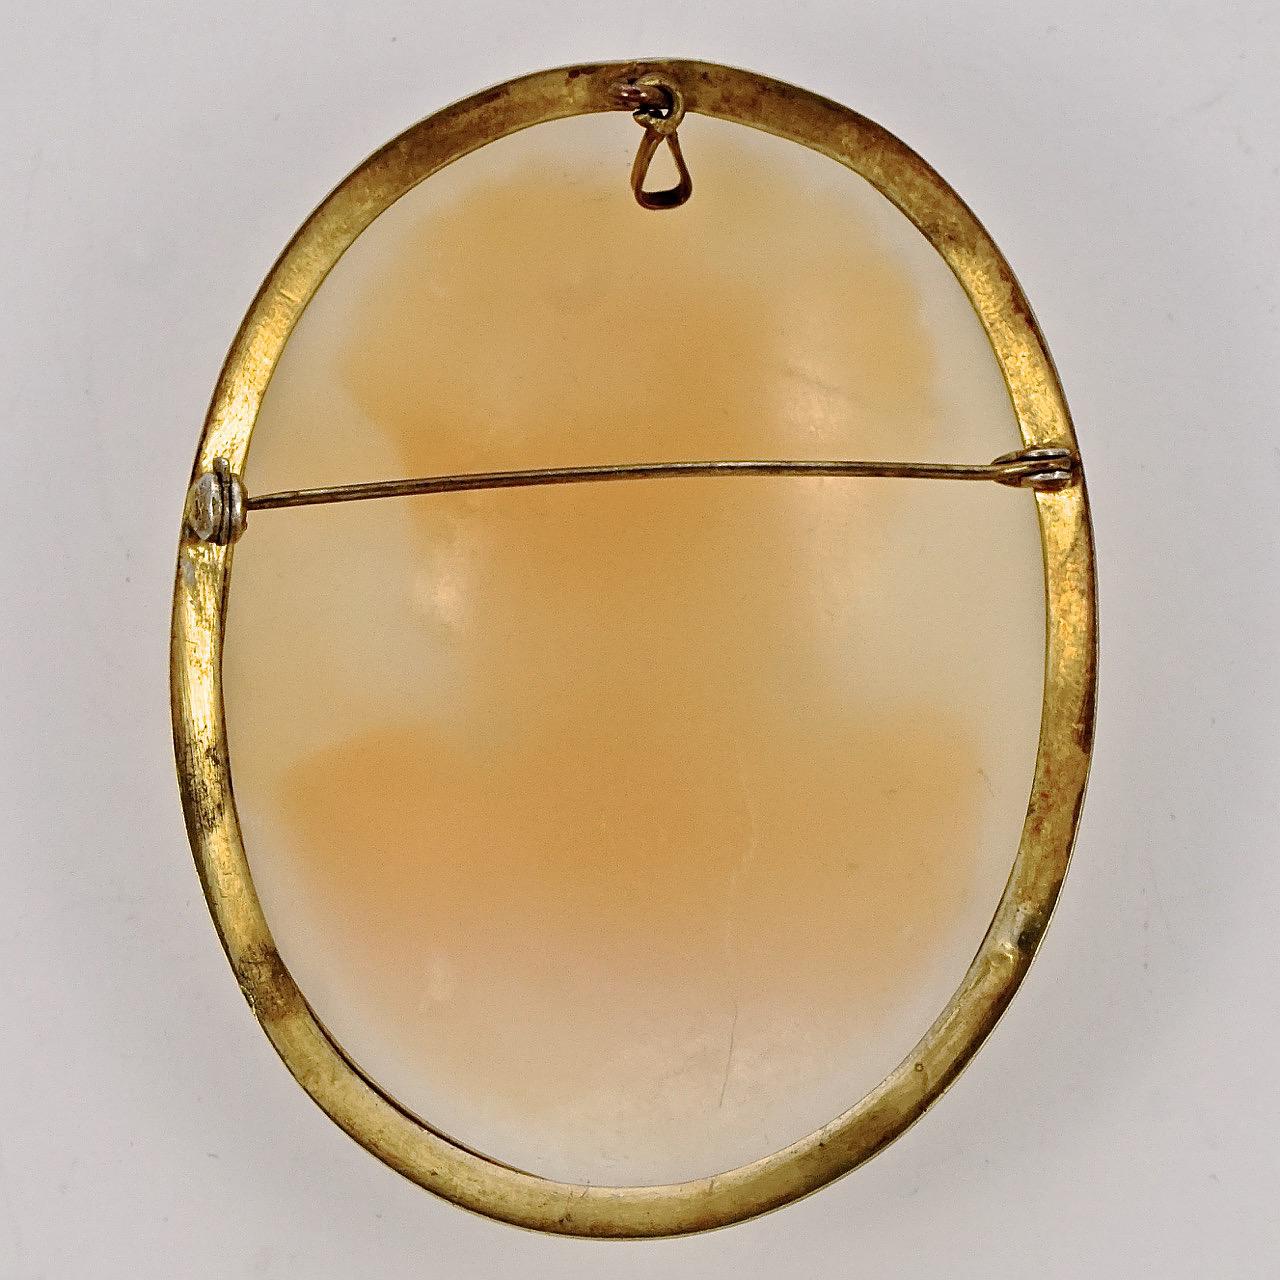 Beautiful large carved shell cameo brooch of a lady, in a lovely gold plated setting with a rope design. Measuring 6.6cm / 2.6 inches by 5.2cm / 2 inches. There is wear to the gold plating.

This wonderful statement cameo brooch is circa 1950s.